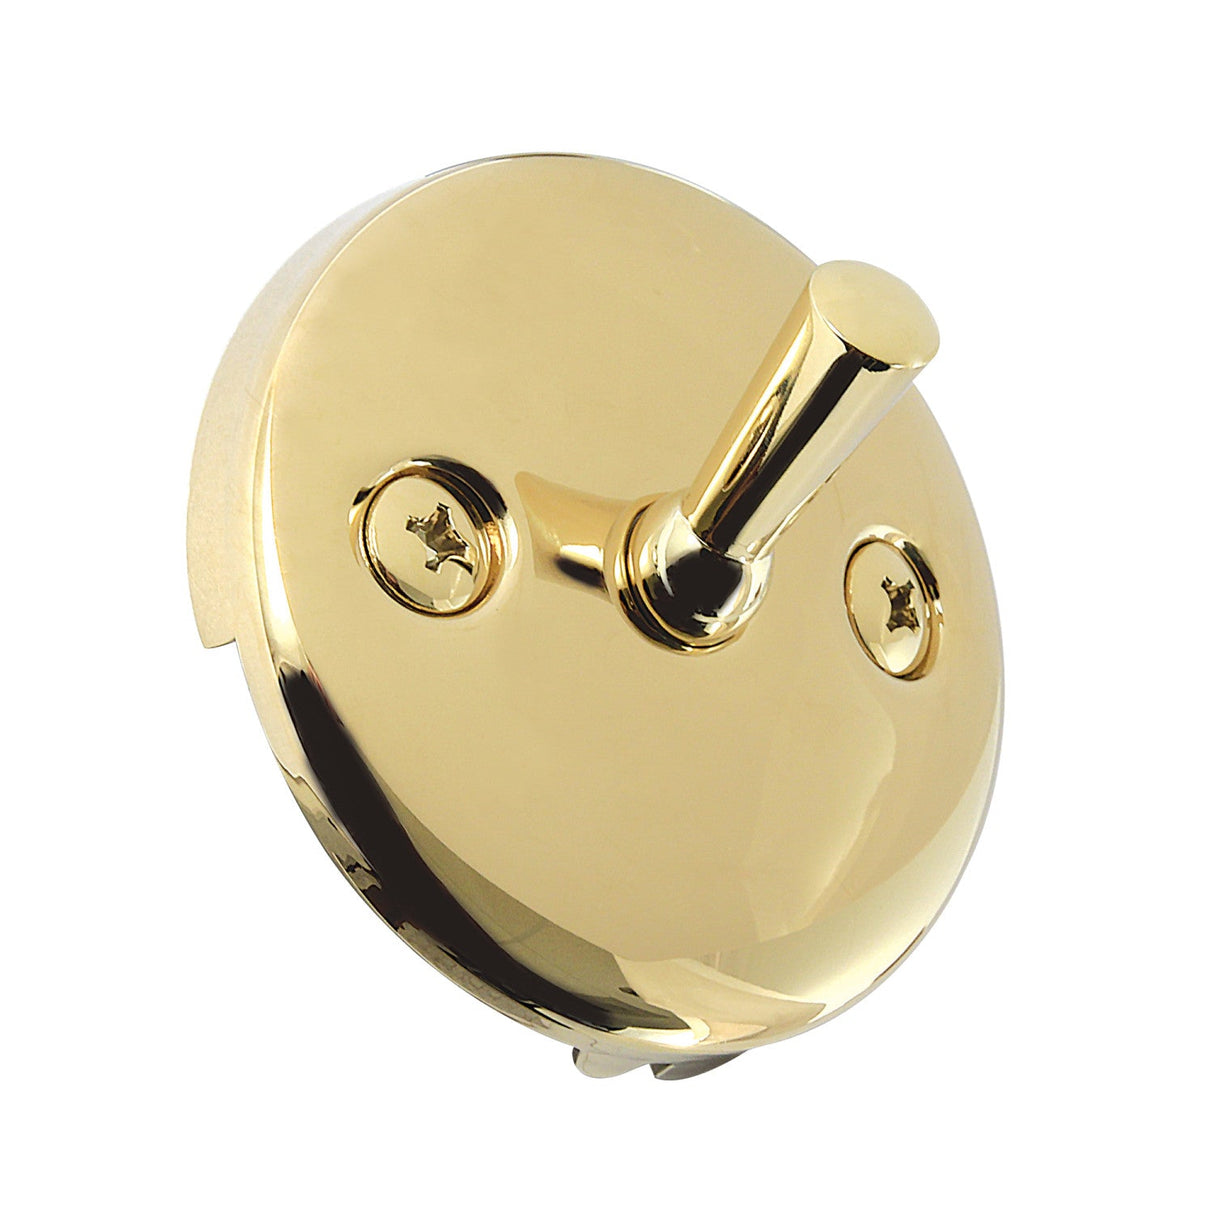 Made To Match DTL102 Round Bathtub Overflow Plate with Trip Lever, Polished Brass